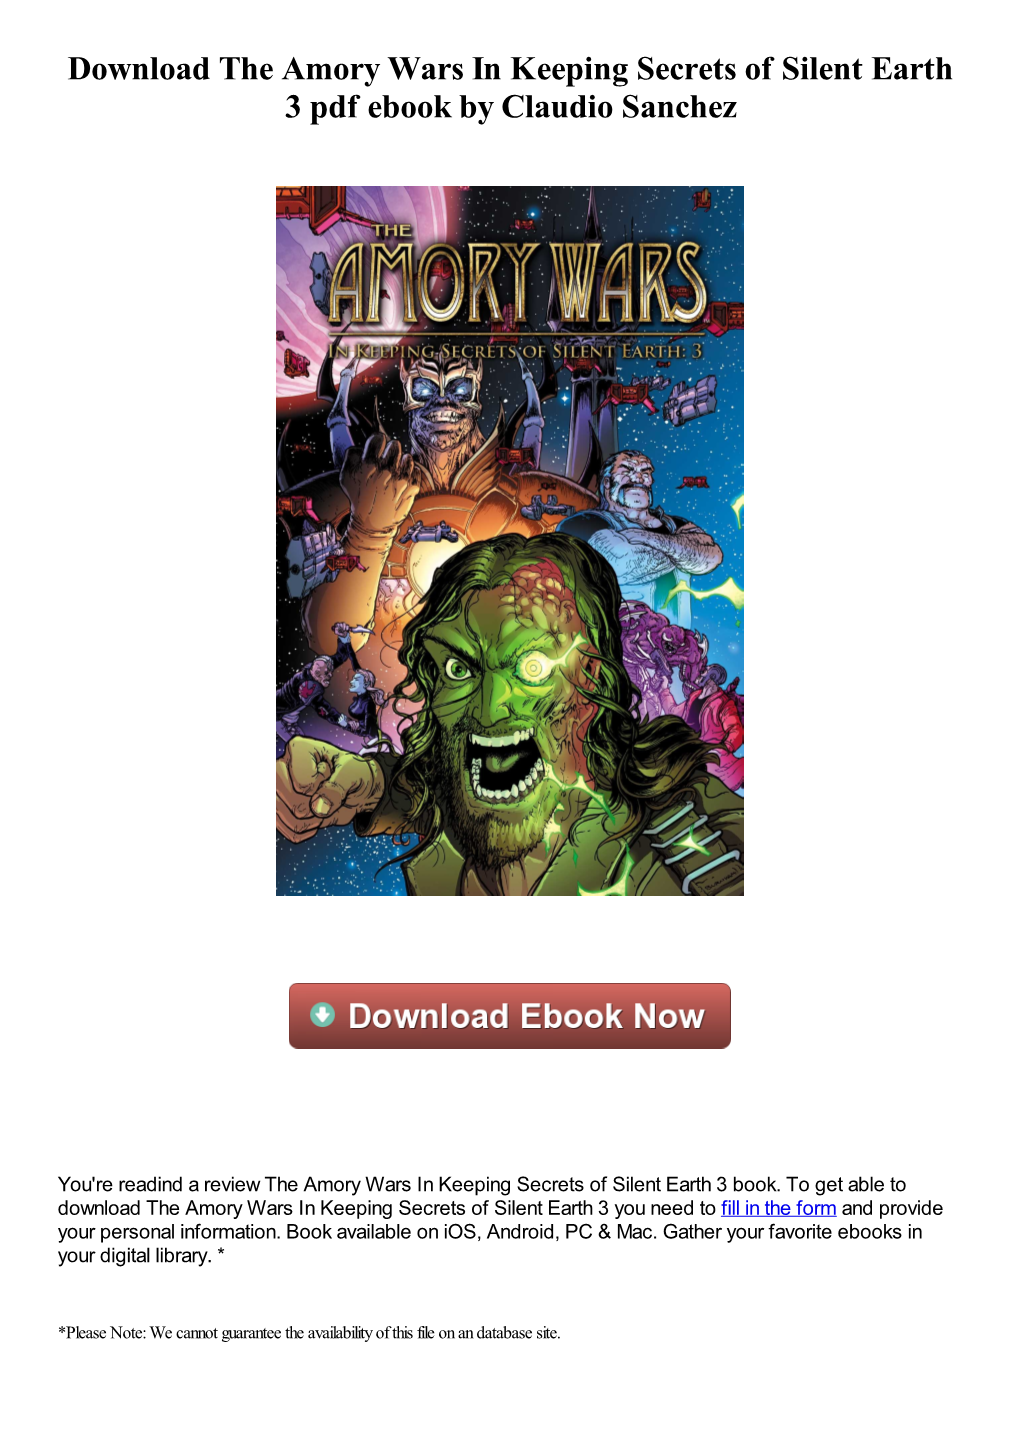 Download the Amory Wars in Keeping Secrets of Silent Earth 3 Pdf Ebook by Claudio Sanchez